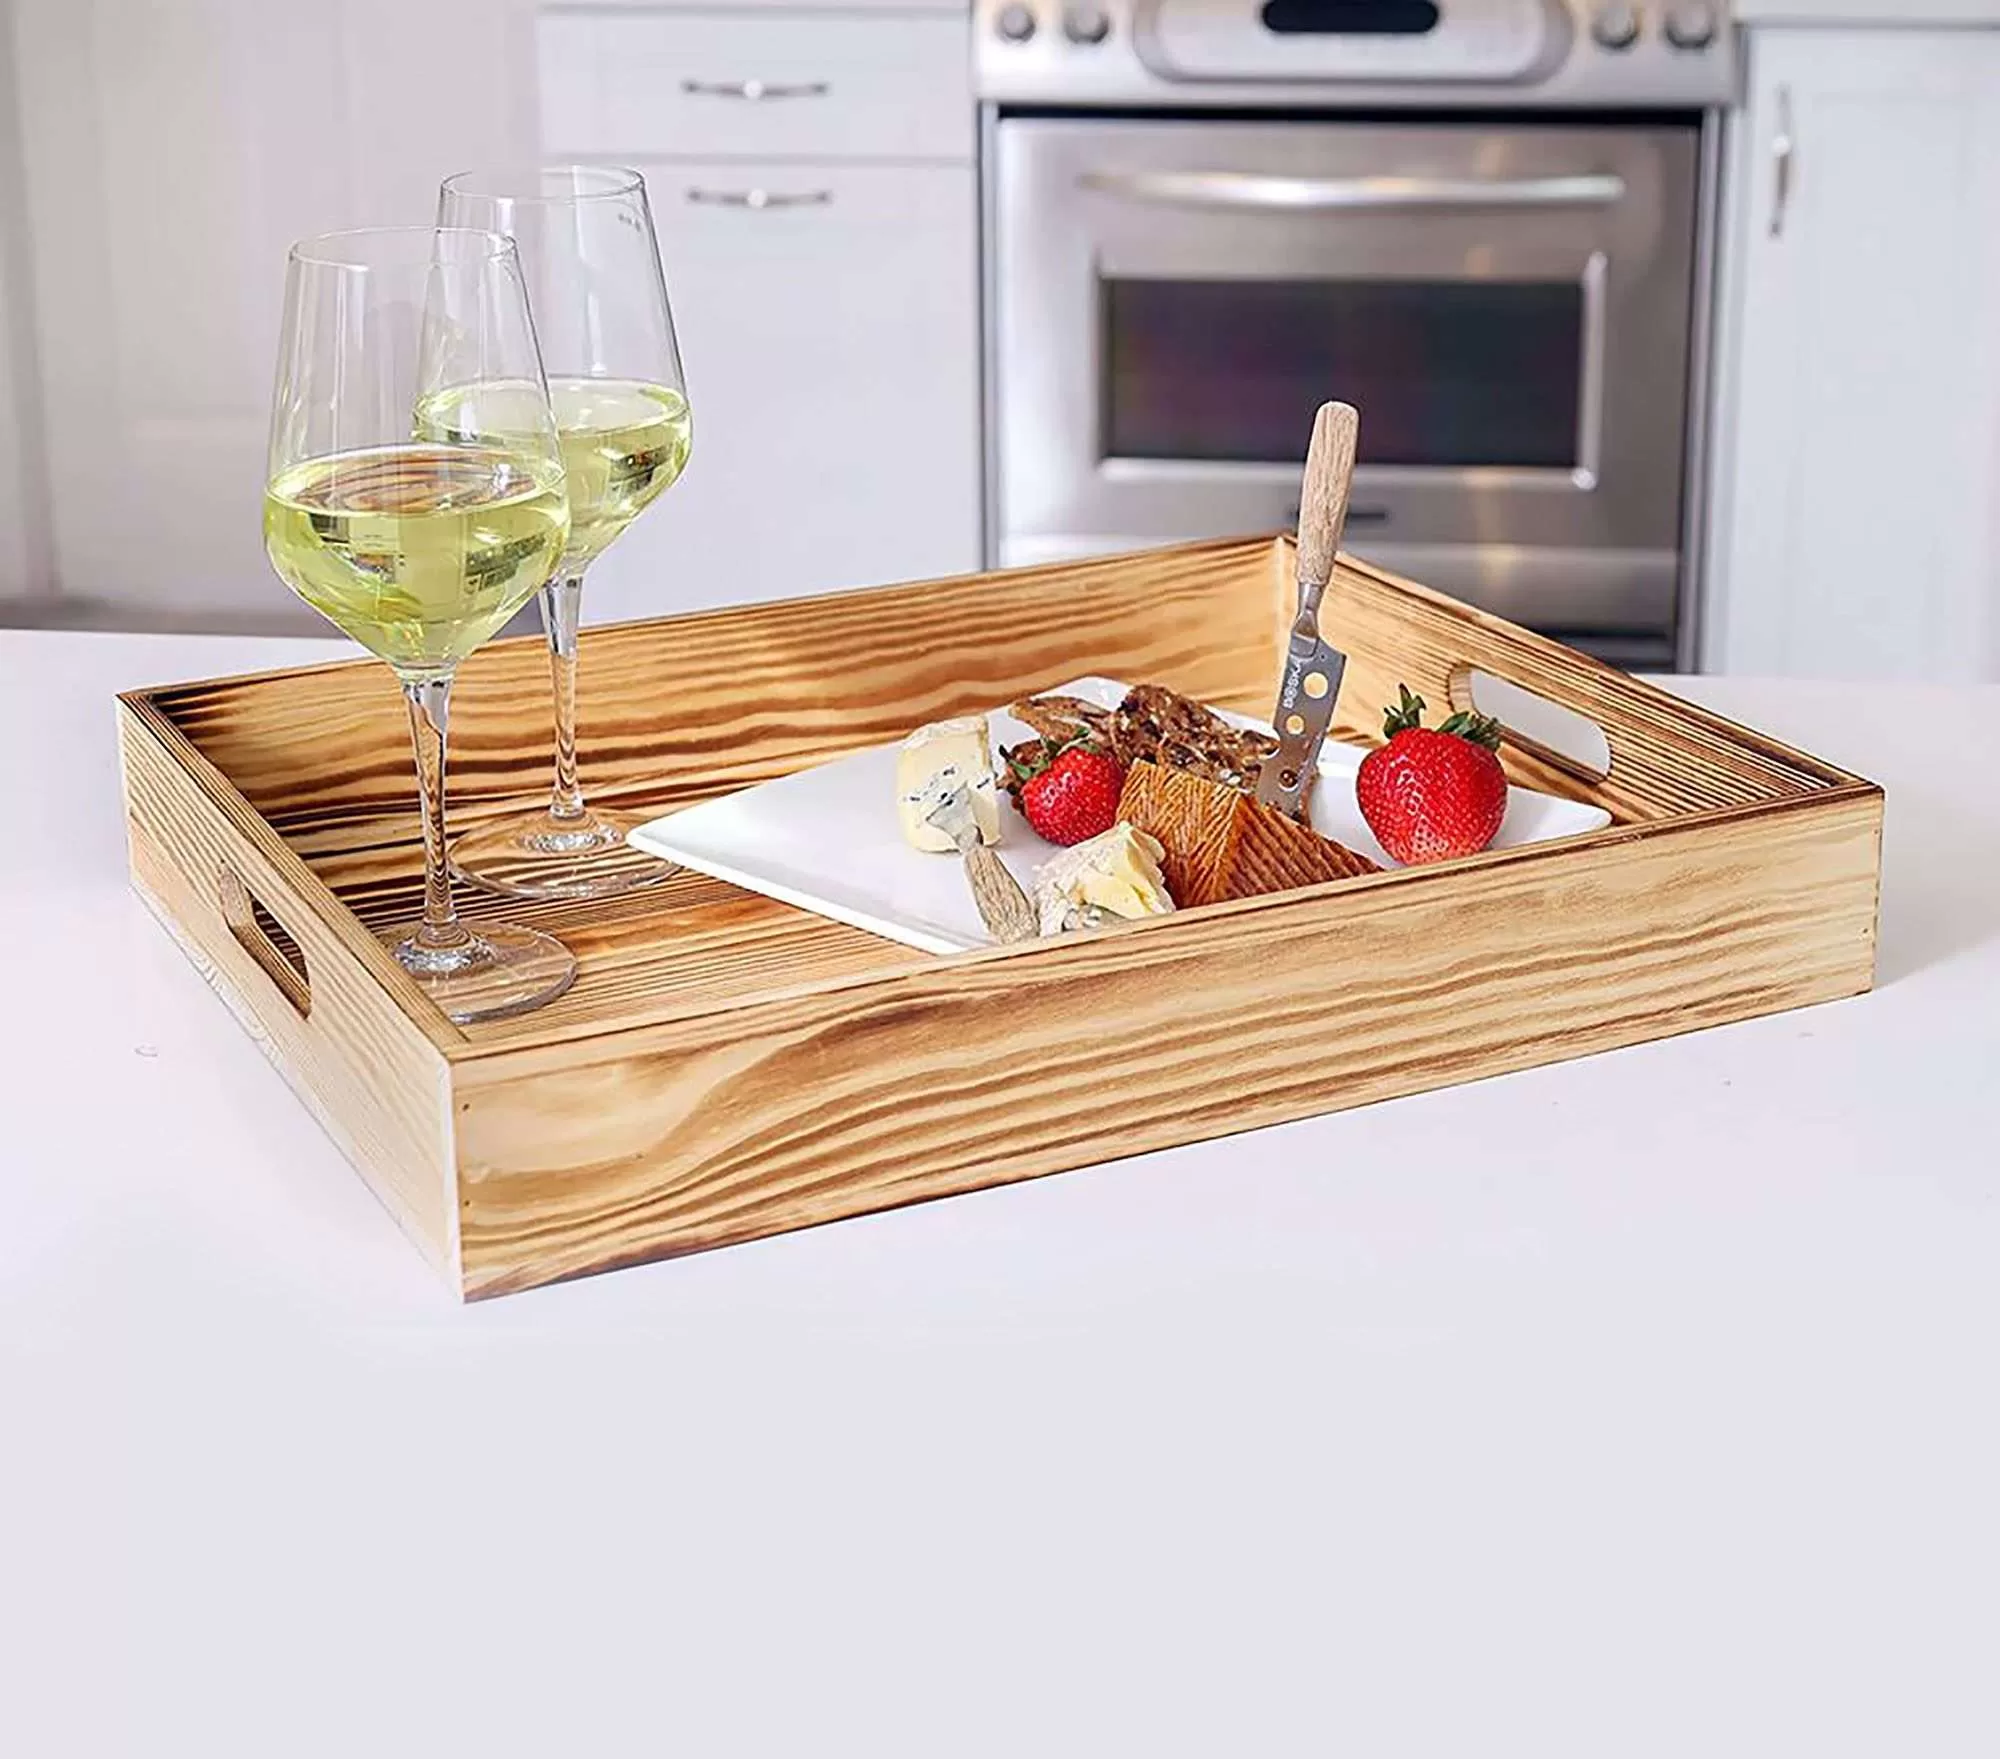 Serving tray for snacks